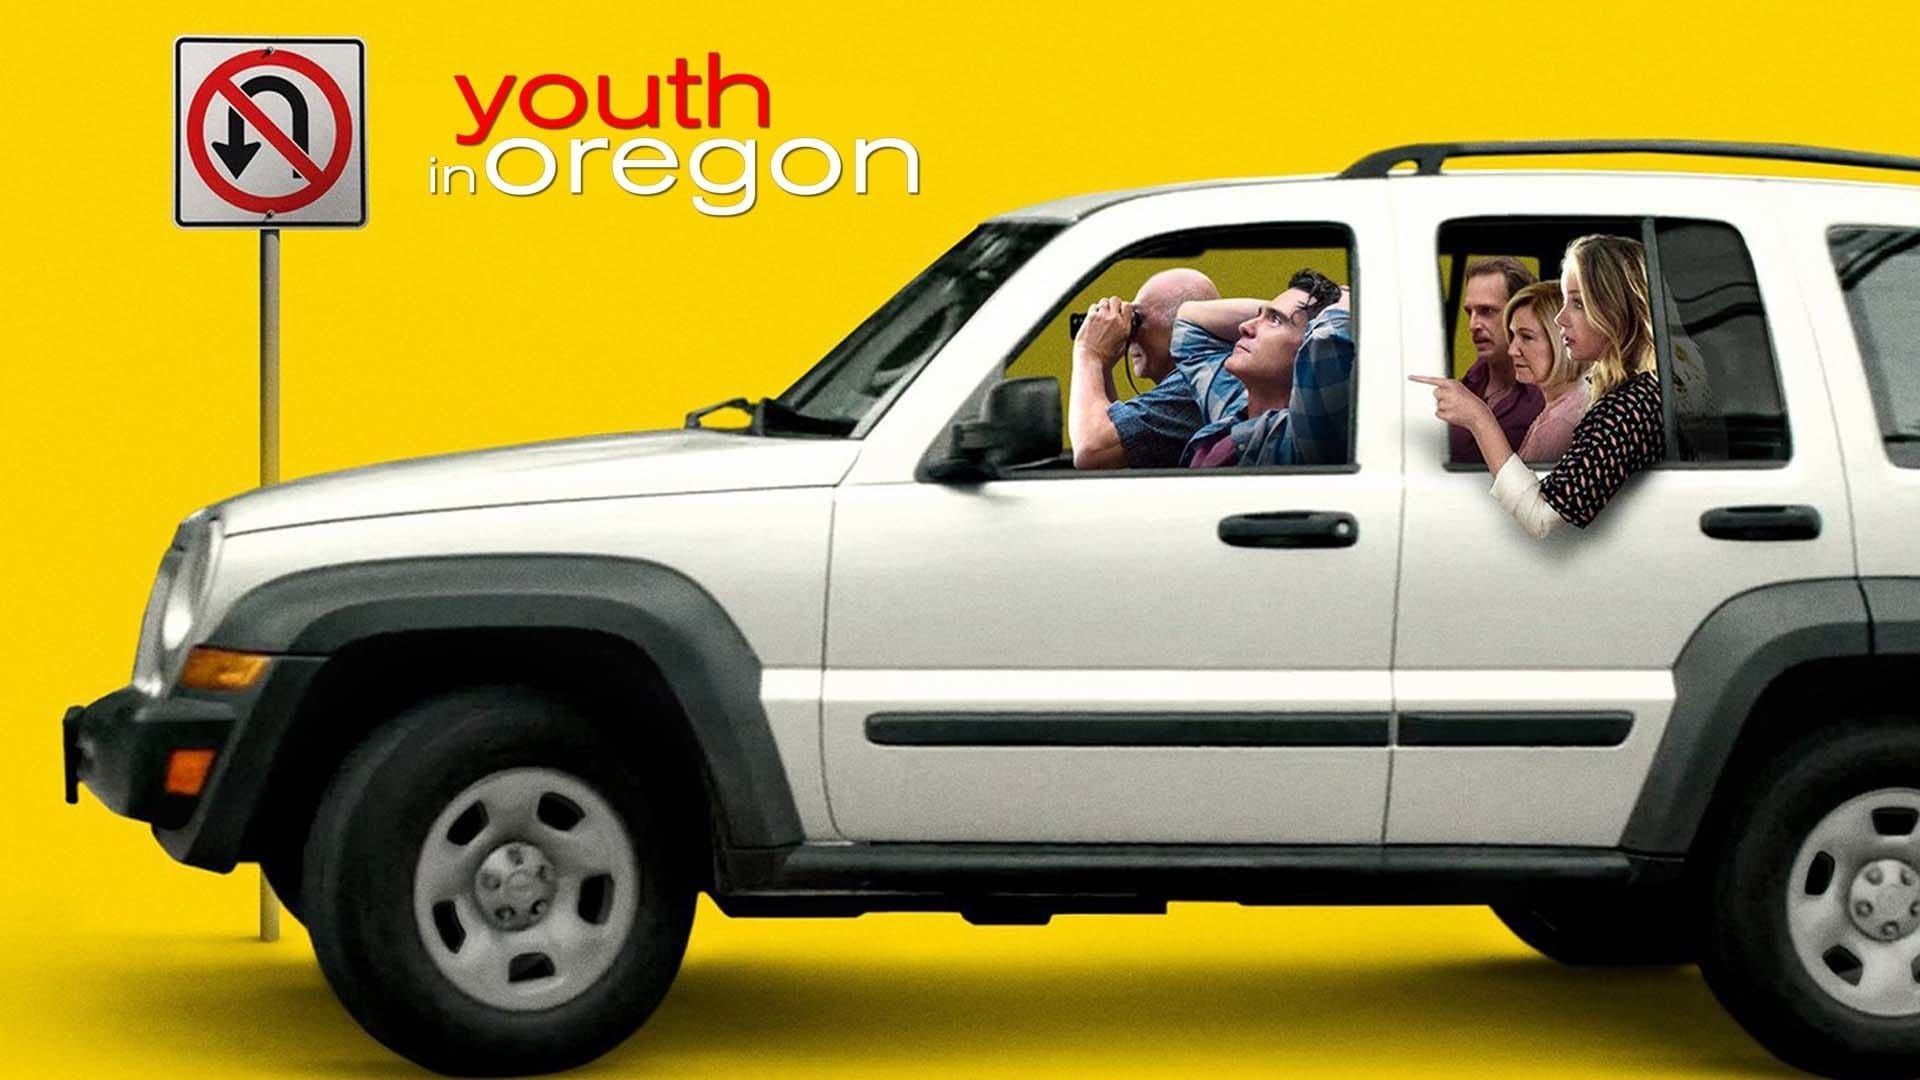 Youth in Oregon background